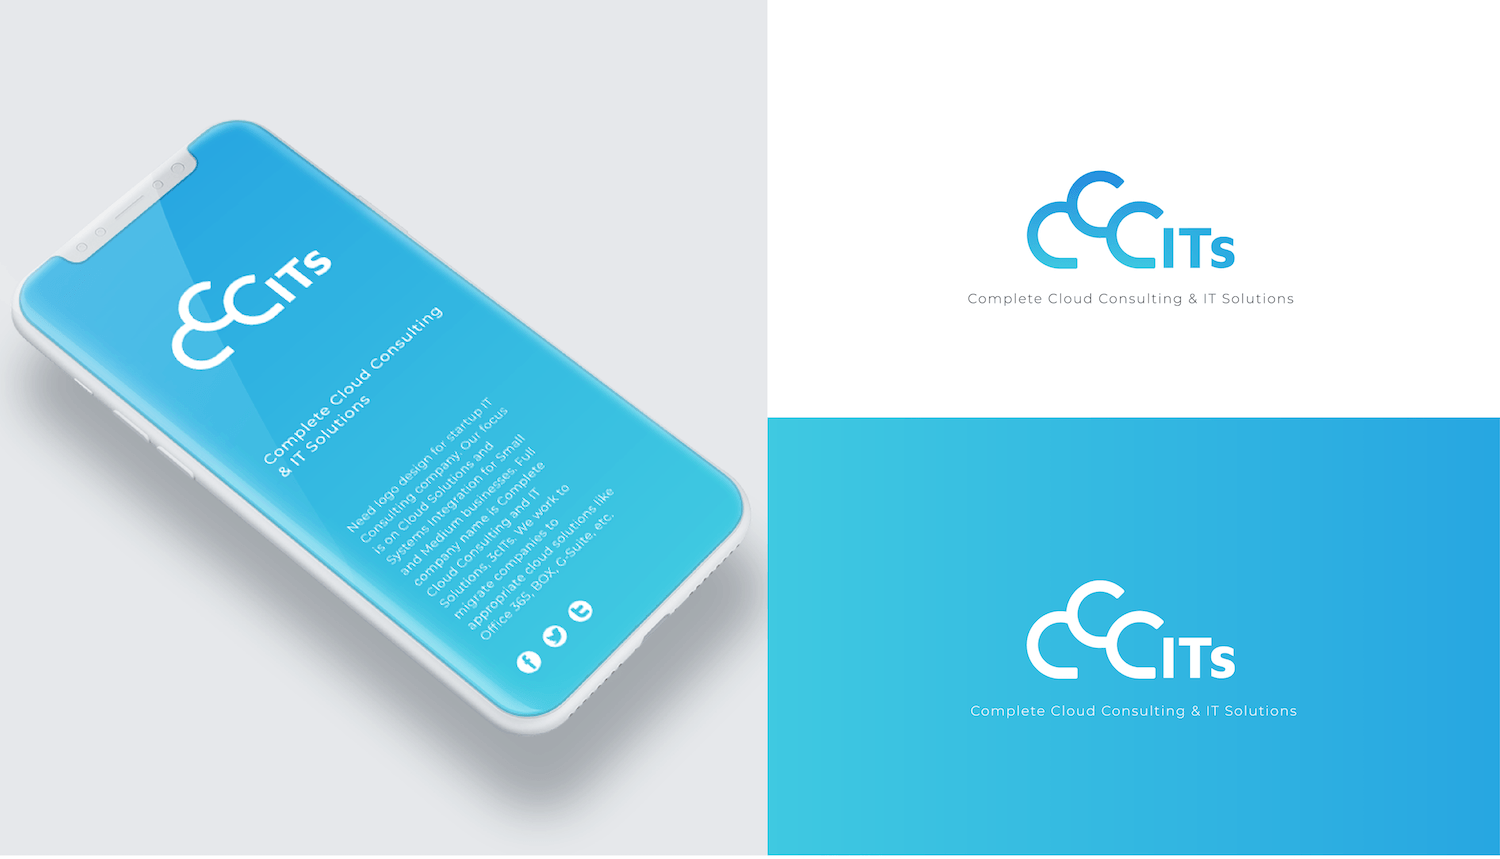 Cloud Company Logo - Modern, Conservative, It Company Logo Design for 3cITs or Company ...